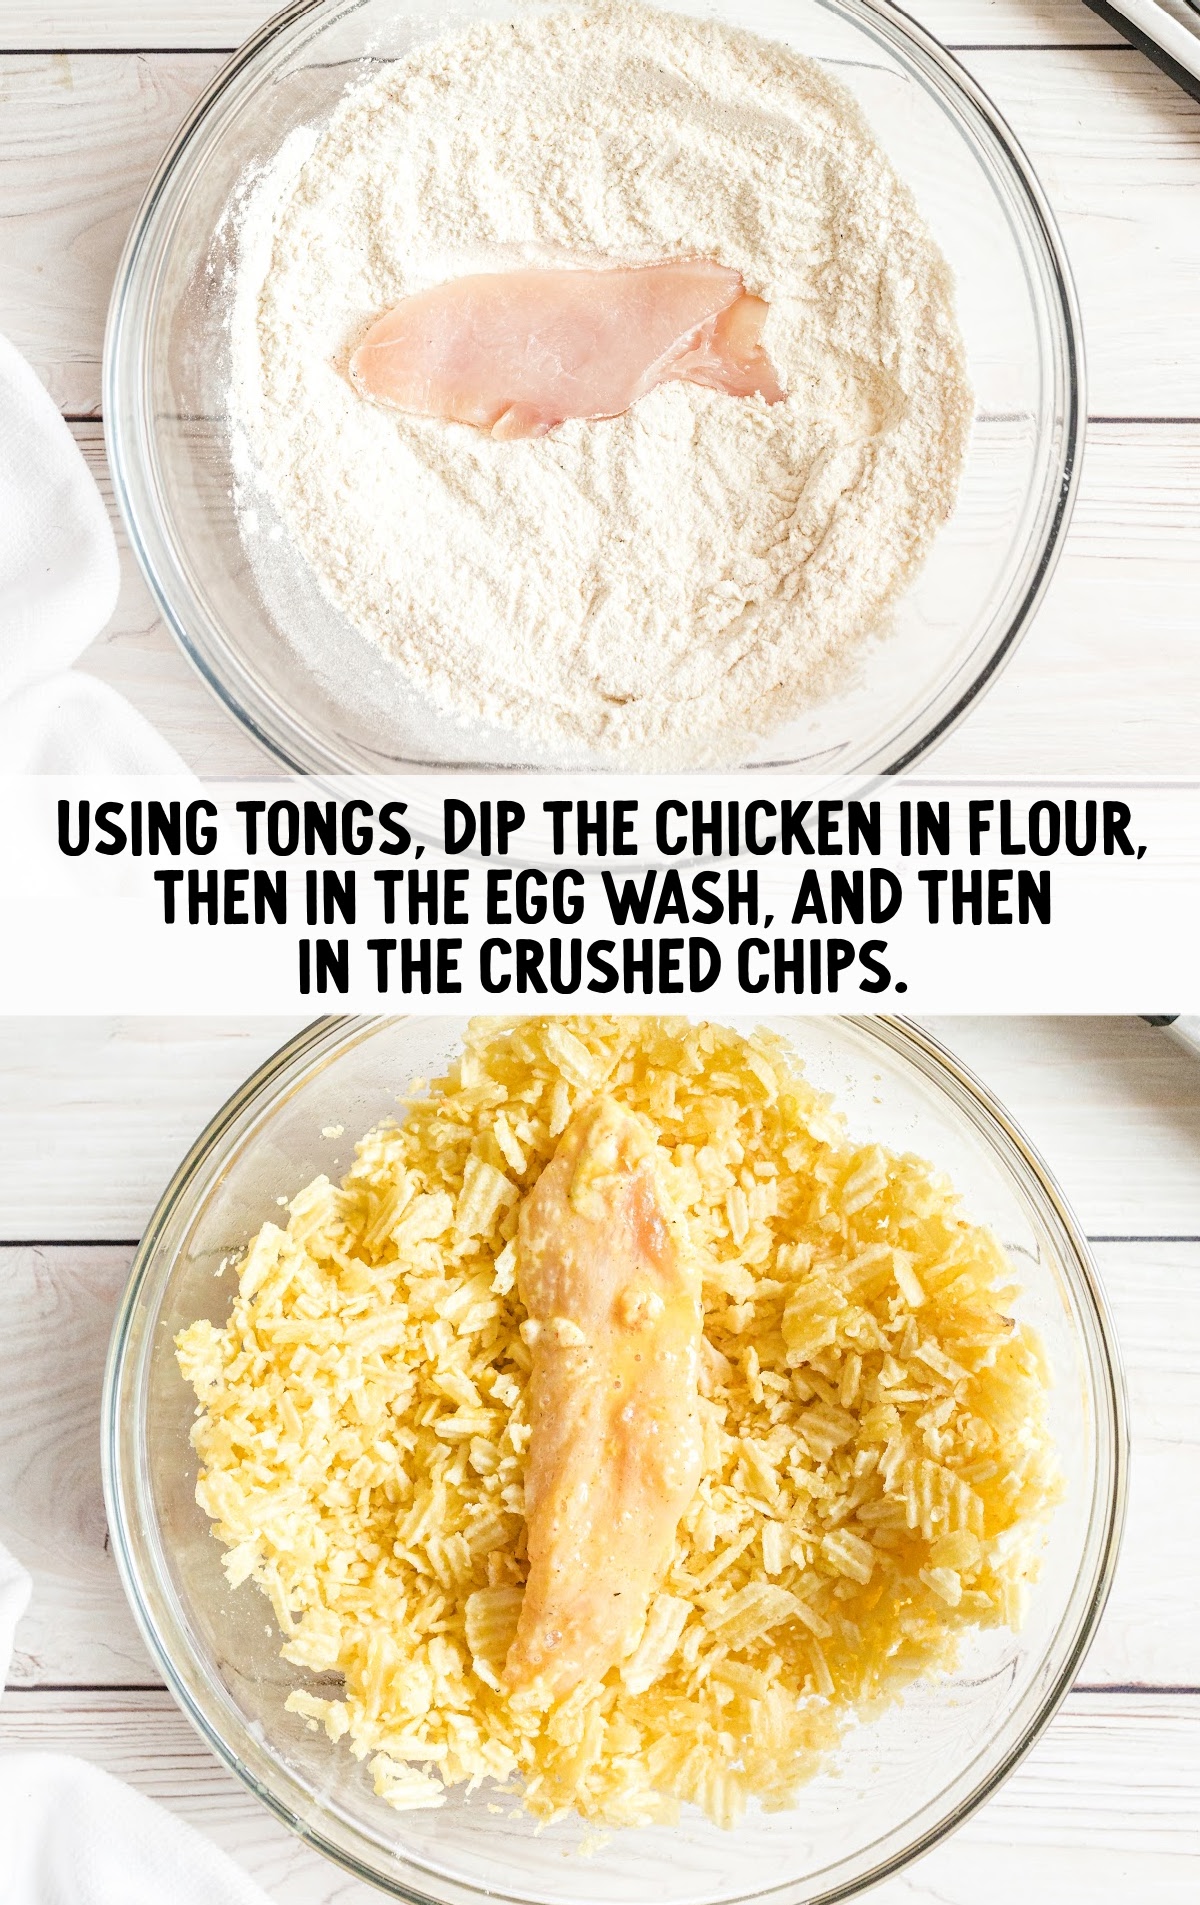 chicken dipped into bowls of the flour, egg wash, then crushed chips